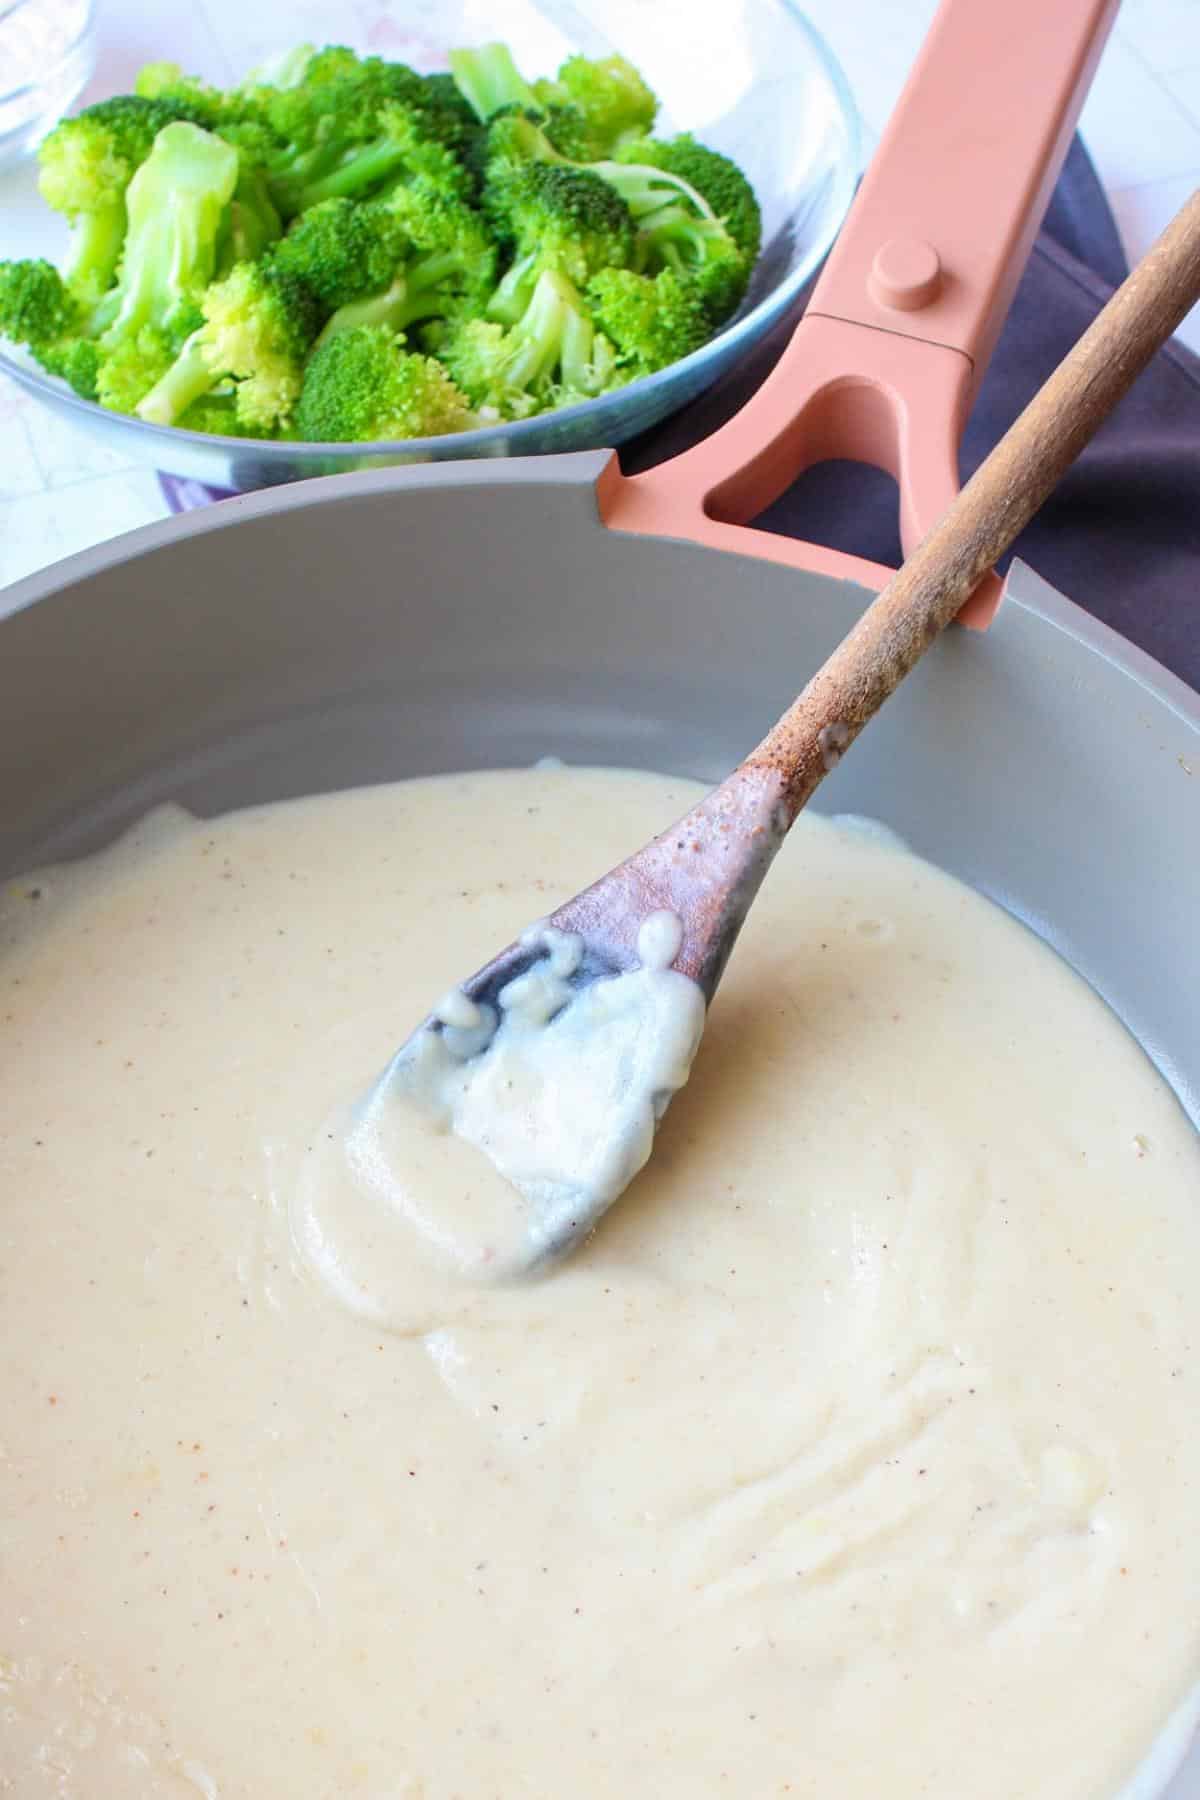 Vegan bechamel sauce in a pan next to a bowl of steamed broccoli